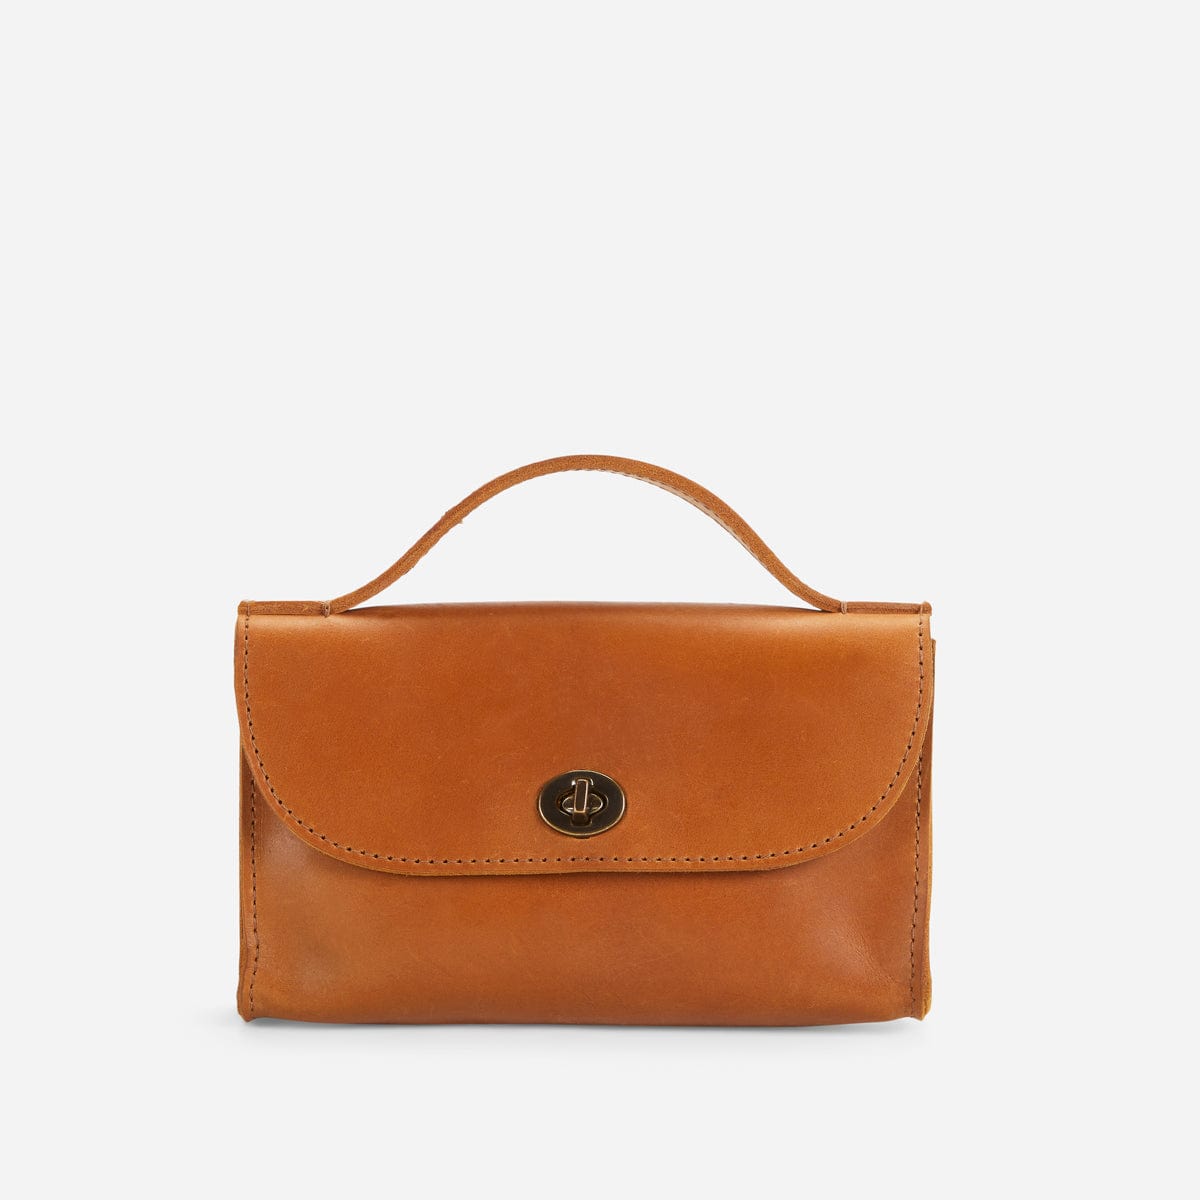 Mens Leather Bags, Backpacks & Briefcases | Harber London